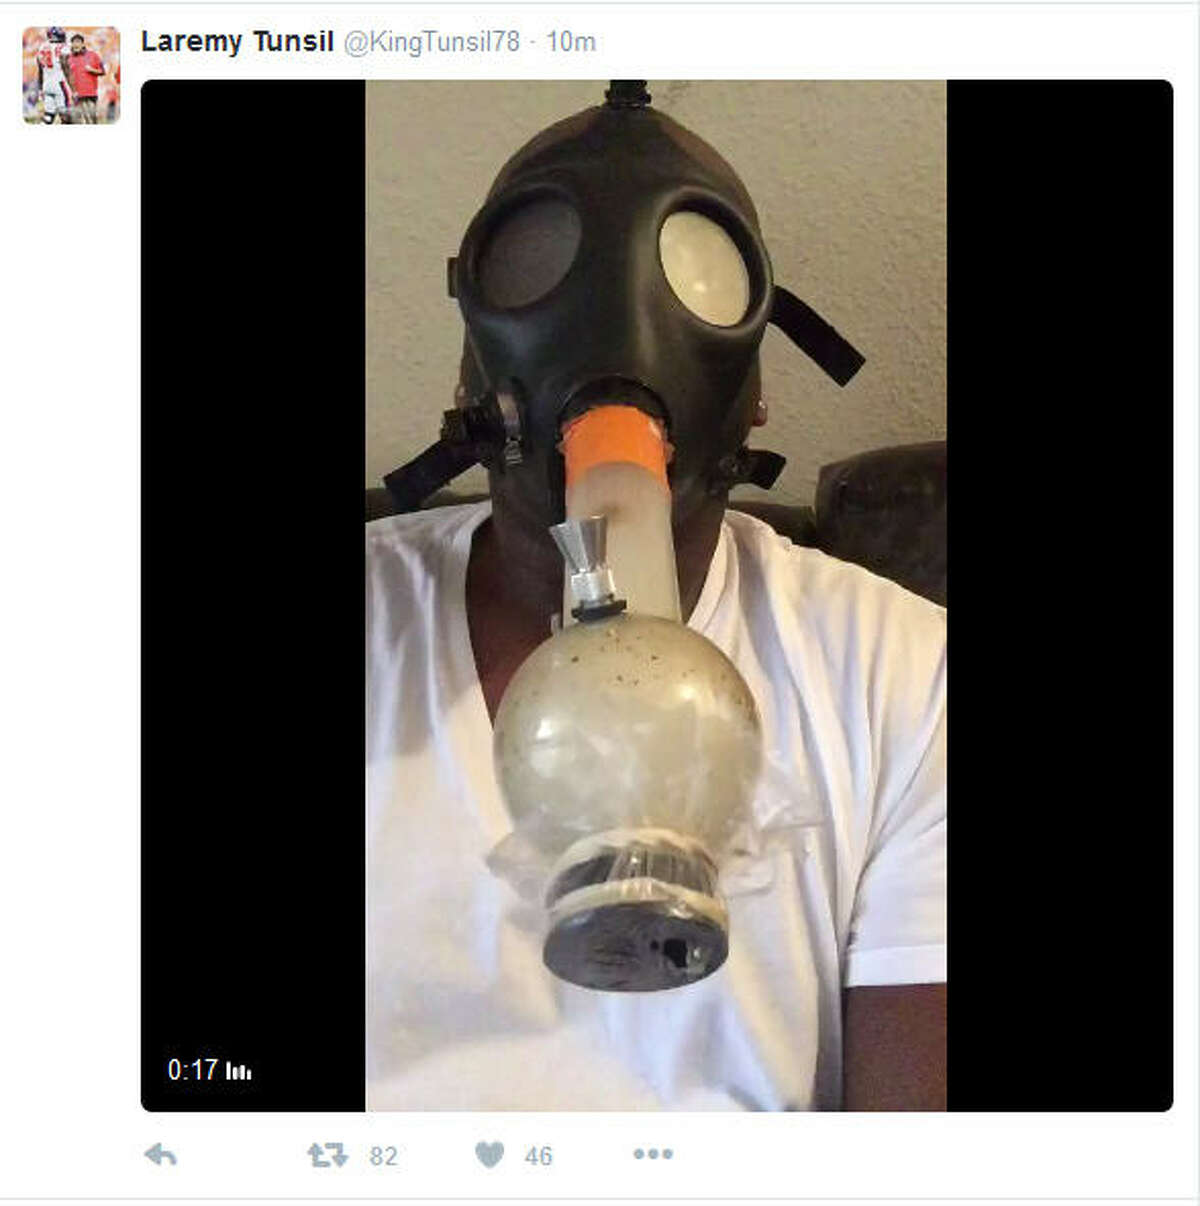 This video of Mississippi offensive lineman Laremy Tunsil wearing a gas mask and smoking an unknown substance from a bong was posted on his Twitter account right before this year's NFL draft started. Tunsil and his agent claim he was hacked. He slid to 13th in the draft after at one point being considered the likely No. 1 overall pick.